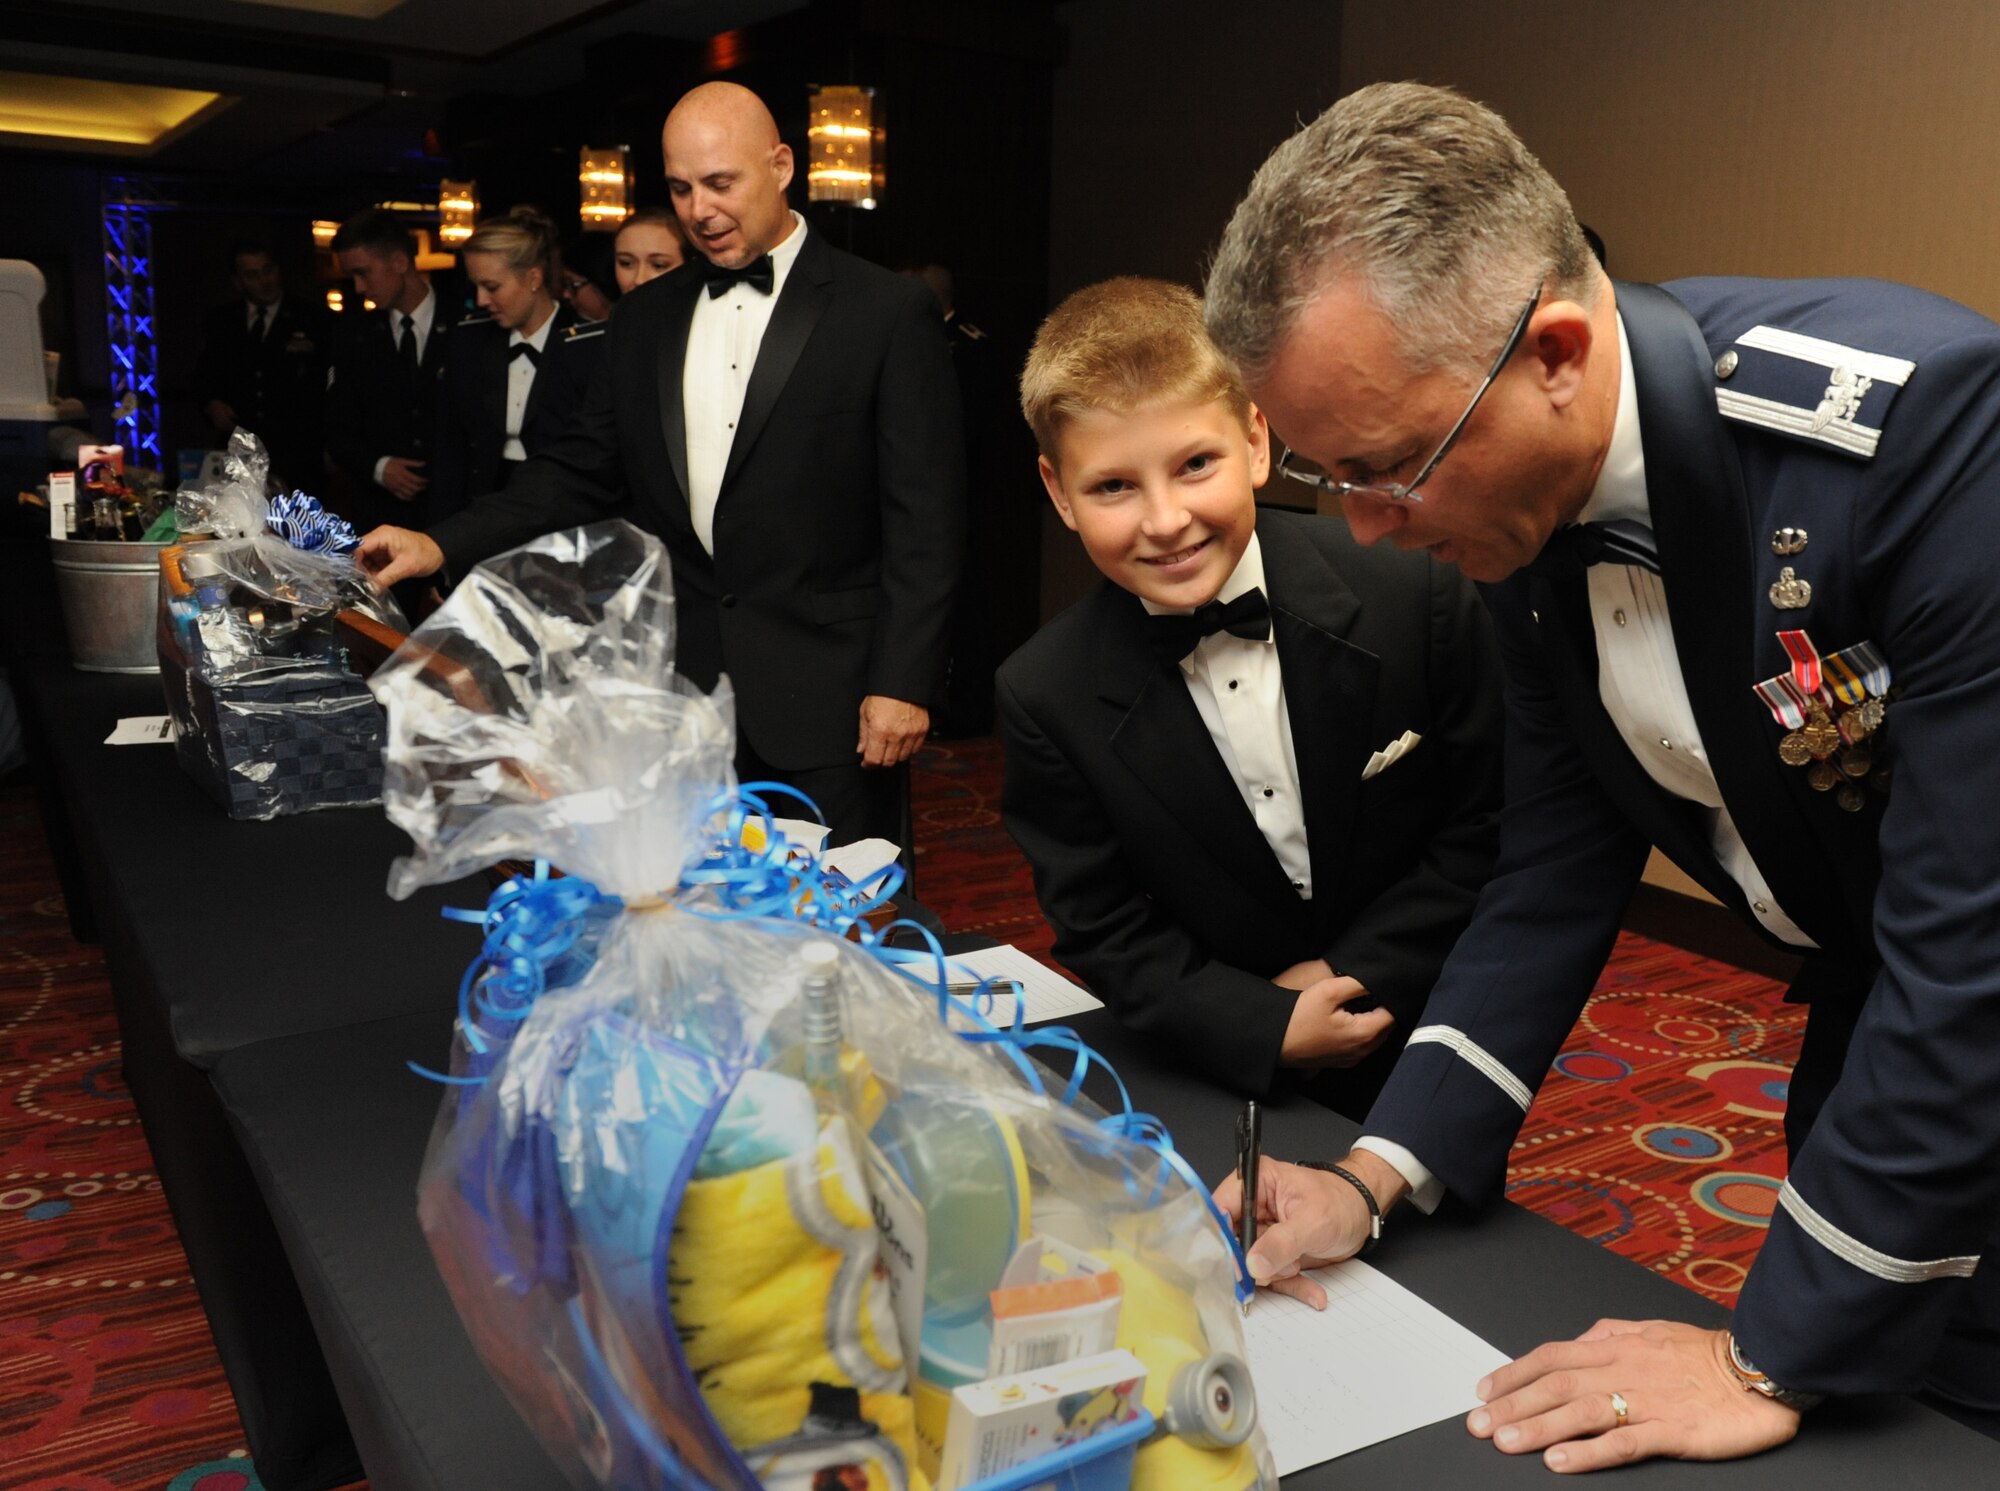 Col. Marty DeStazio, 602nd Training Group (Provisional) commander, participates in the silent auction as his son, Vincent, looks on during the Keesler Air Force Ball at the Imperial Palace Casino Sept. 24, 2016, Biloxi, Miss. The event was sponsored by the Air Force Association John C. Stennis Chapter #332 to celebrate the Air Force’s 69th birthday and the base’s 75th anniversary. (U.S. Air Force photo by Kemberly Groue/Released)